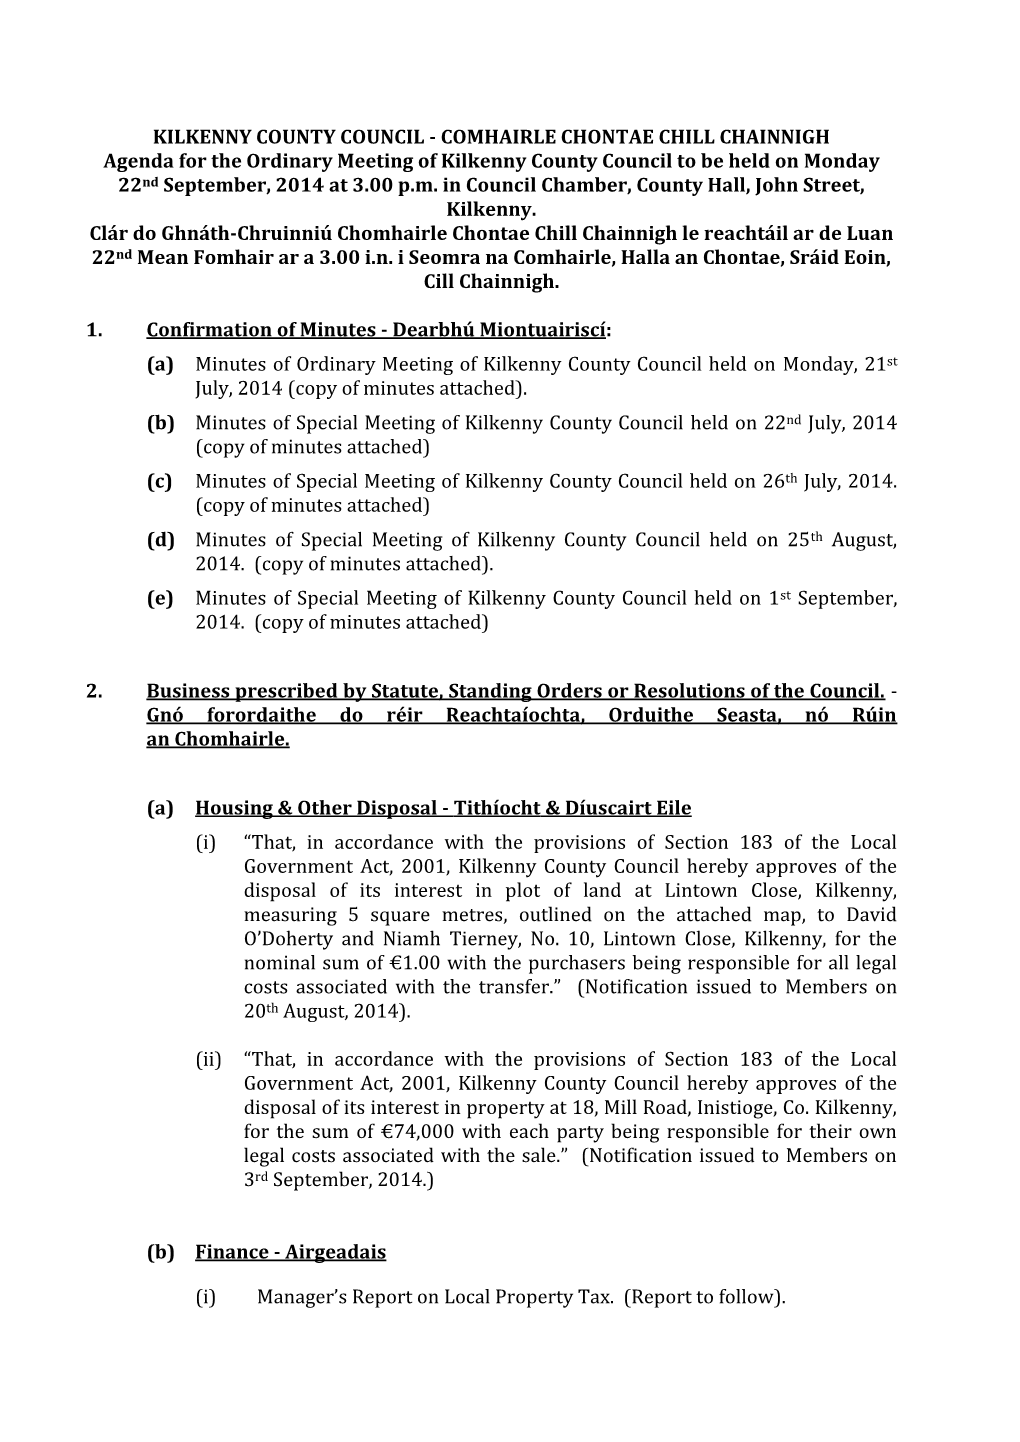 Agenda for the Ordinary Meeting of Kilkenny County Council to Be Held on Monday 22Nd September, 2014 at 3.00 P.M